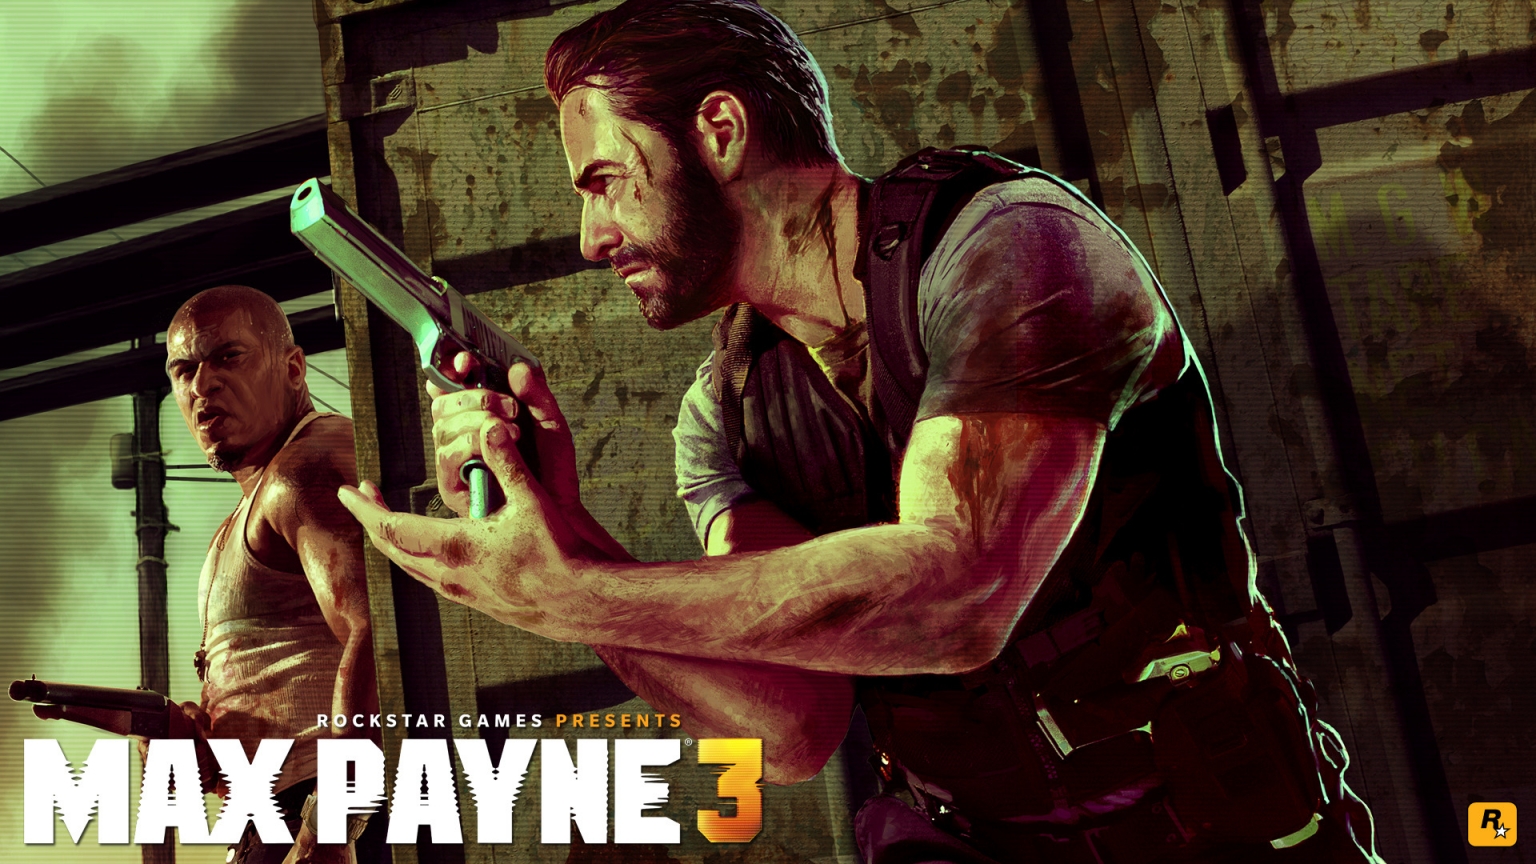 Max Payne 2012 for 1536 x 864 HDTV resolution